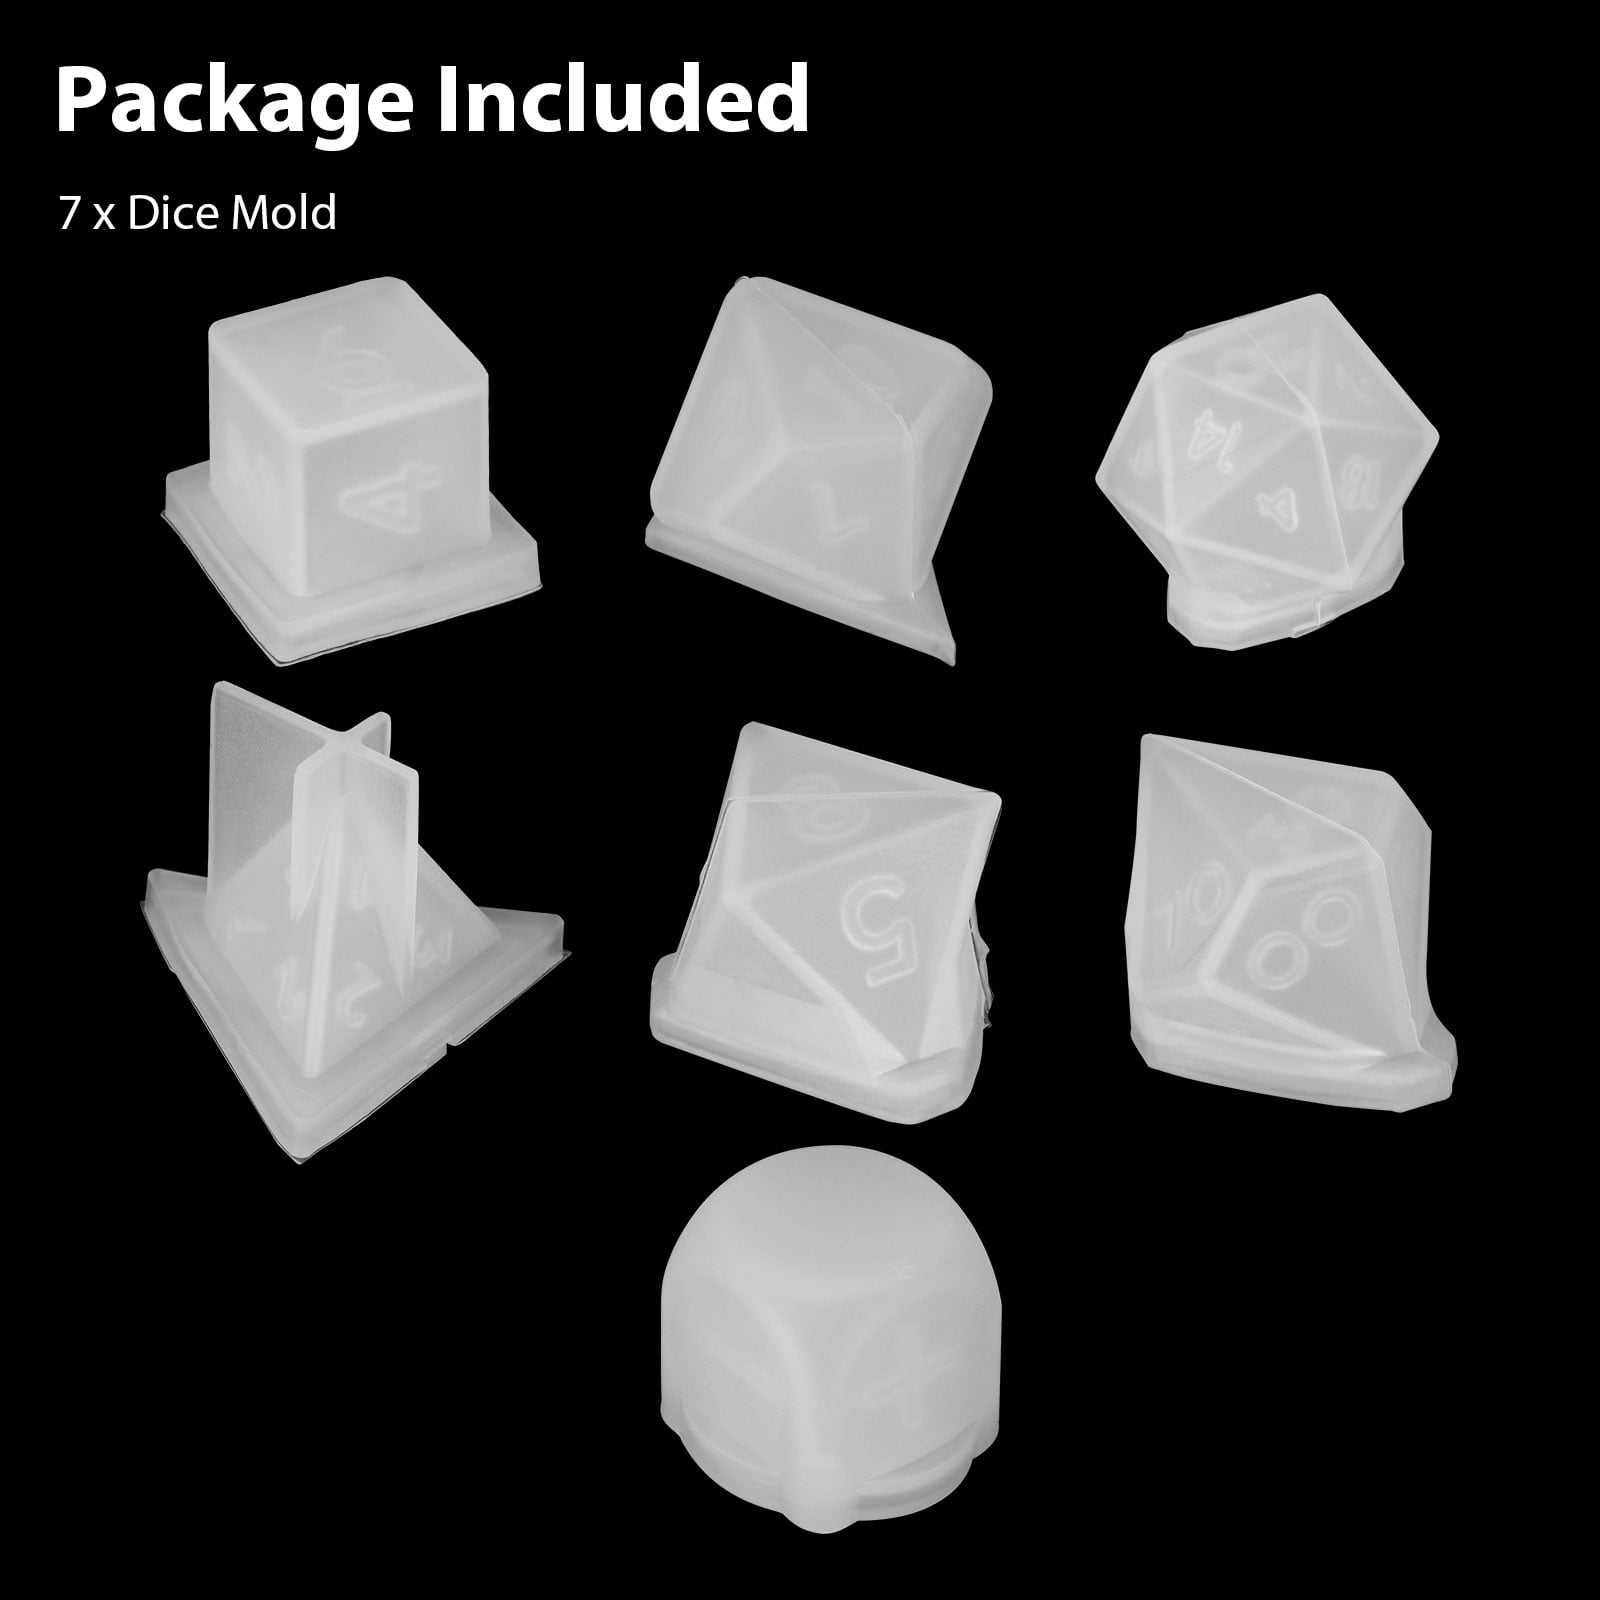 7 Pcs Dice Epoxy Resin Molds, TSV Multiple Shapes Polyhedral Dice Molds, Clear Silicone Casting Molds for DIY Jewelry Crafts, Table Games Dice, White